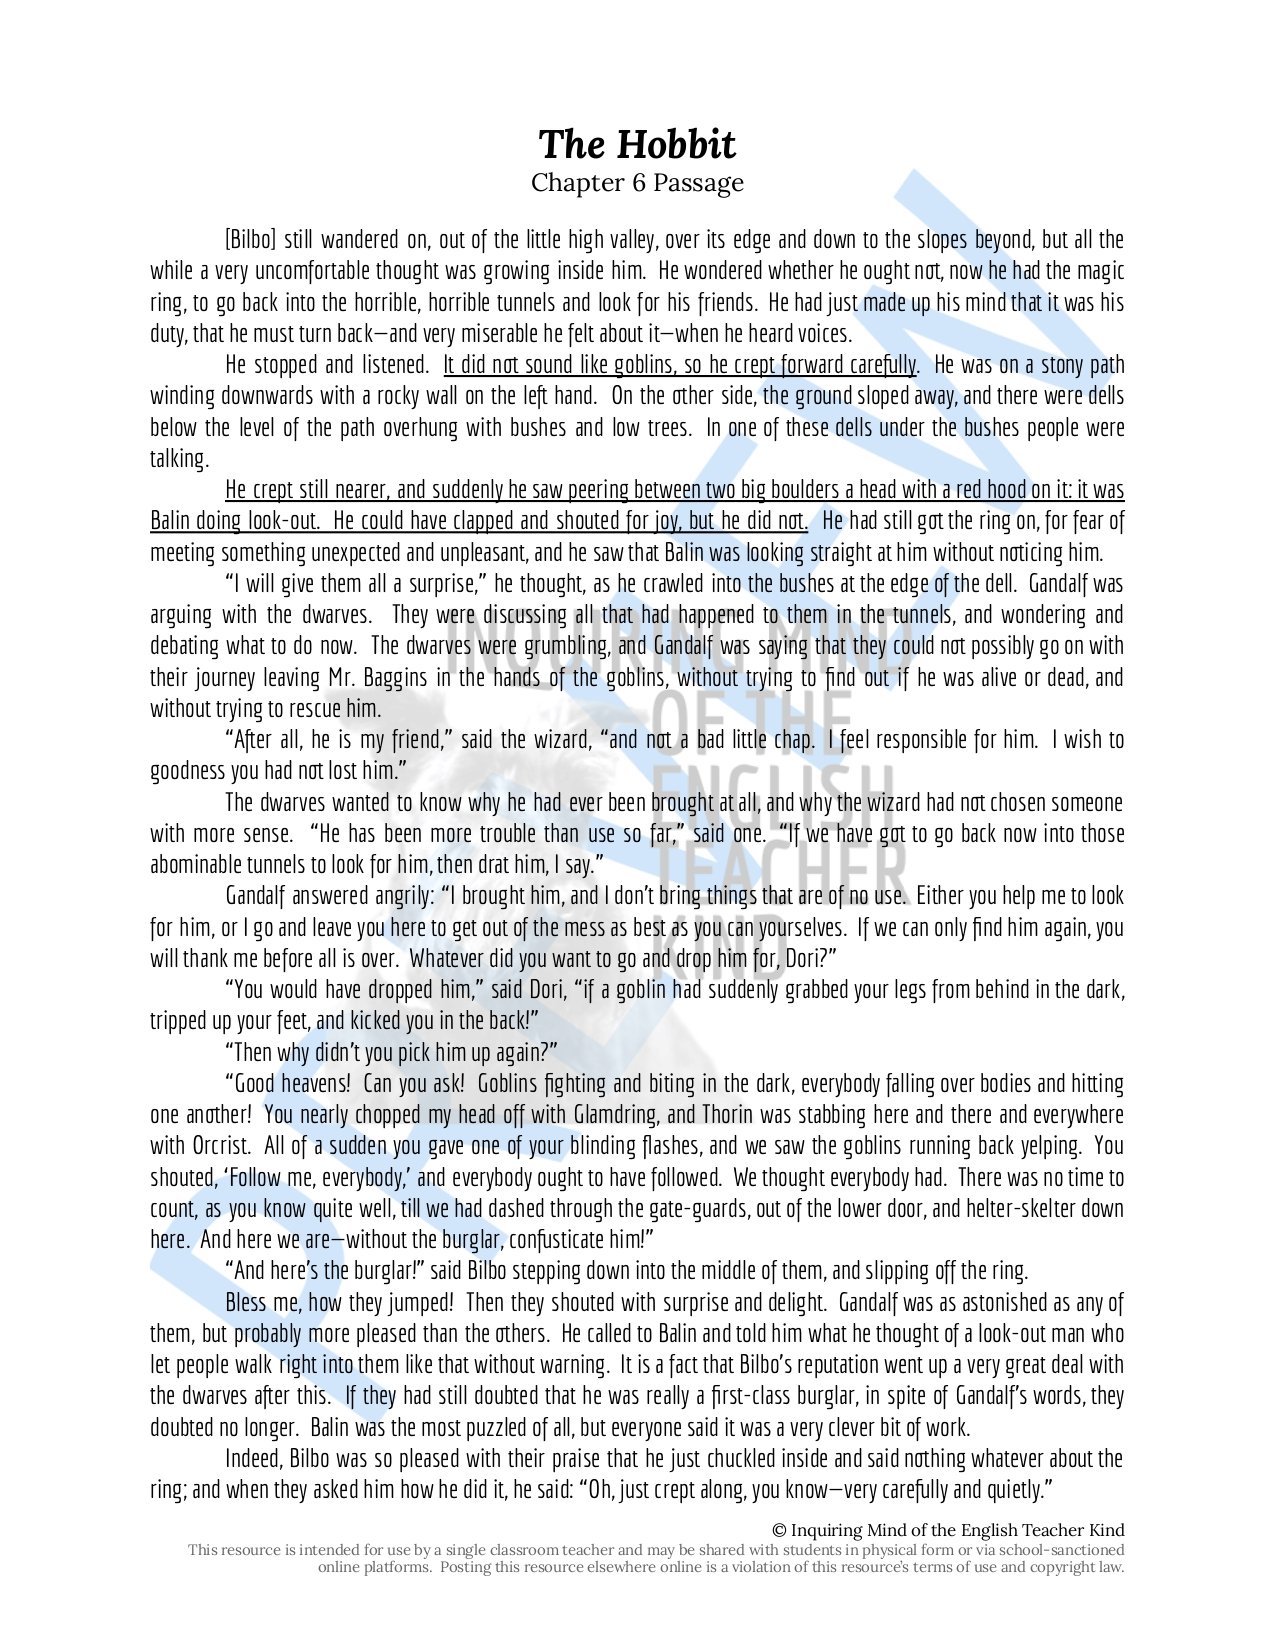 the-hobbit-chapter-6-close-reading-worksheet-and-answer-key-inquiring-mind-of-the-english